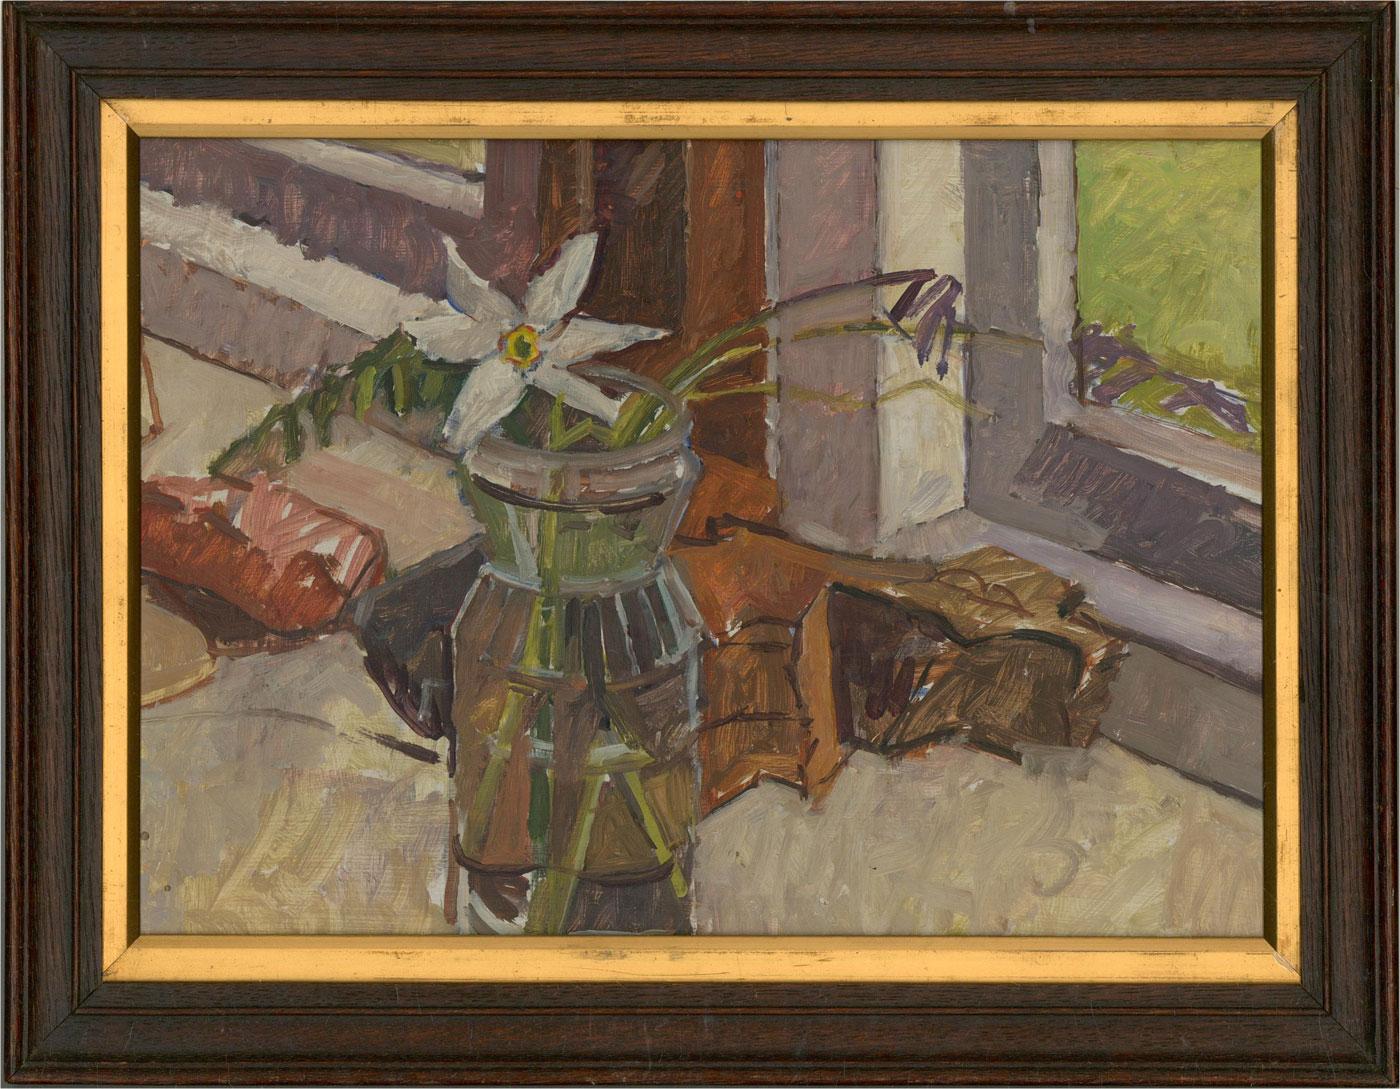 A fine and accomplished oil painting by Roger Bliss, depicting an interior still life scene with a white flower by a window. Unsigned. There are two artist's studio stamps on the reverse. Well-presented in a gilt-effect slip and in a dark wooden